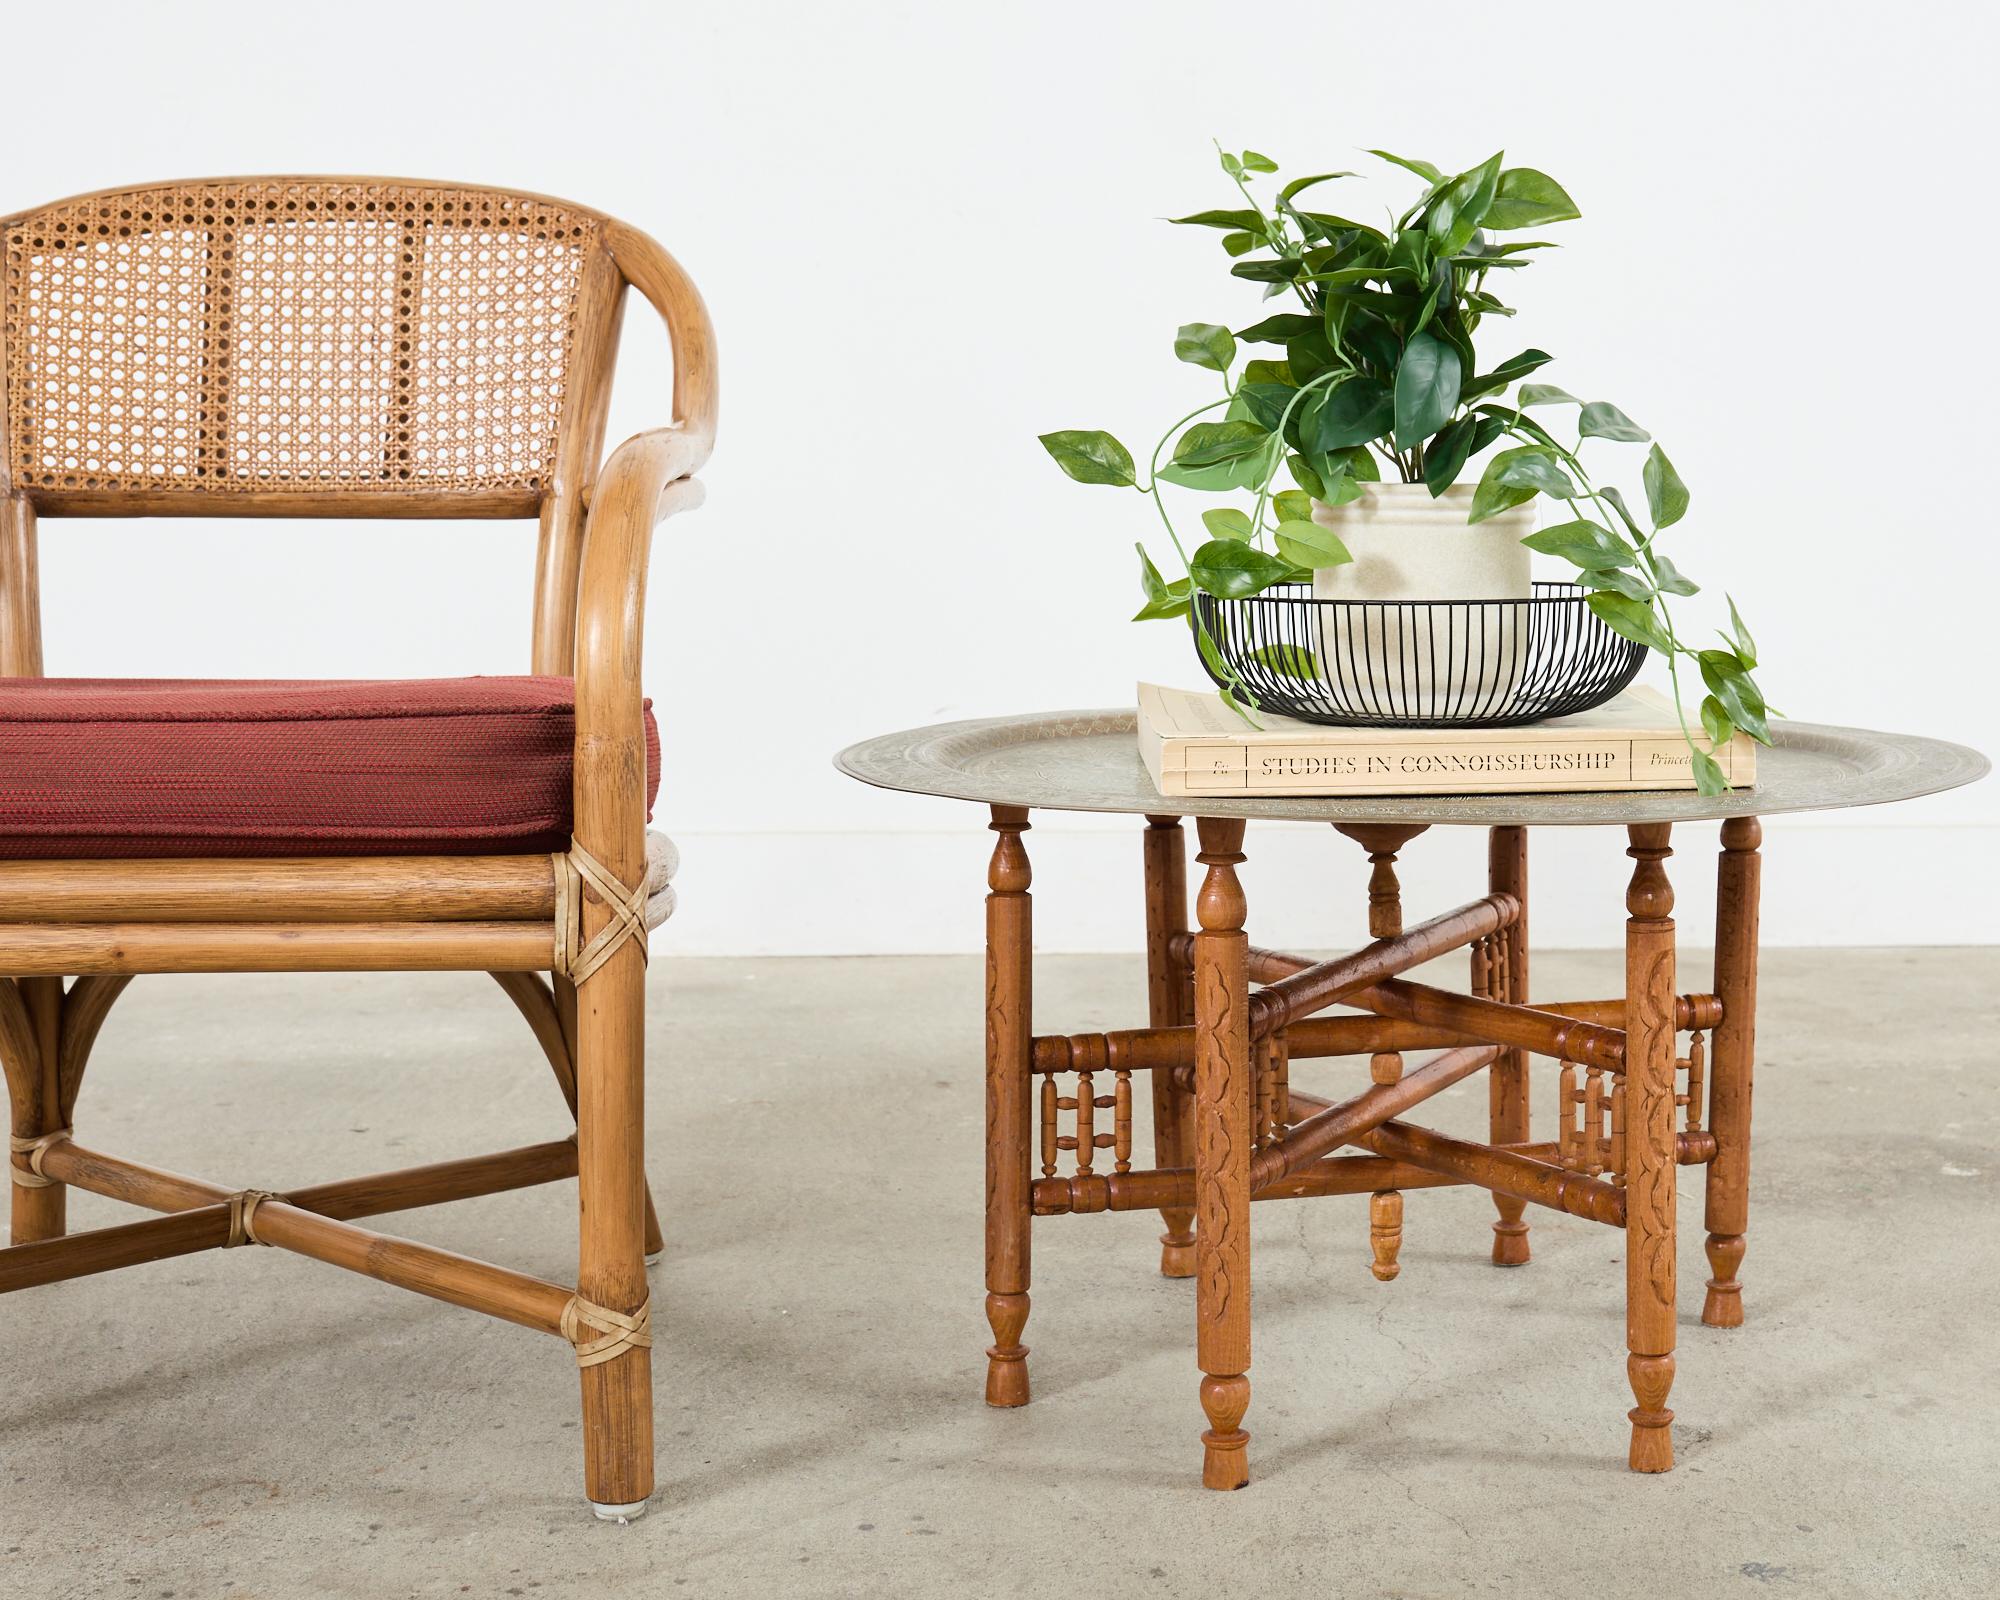 A sinuous rattan framed armchair featuring a woven honeycomb cane back crafted in the California coastal organic modern style by McGuire. The chair has a gracefully curved pole rattan back that becomes the arms and front legs. The rattan is